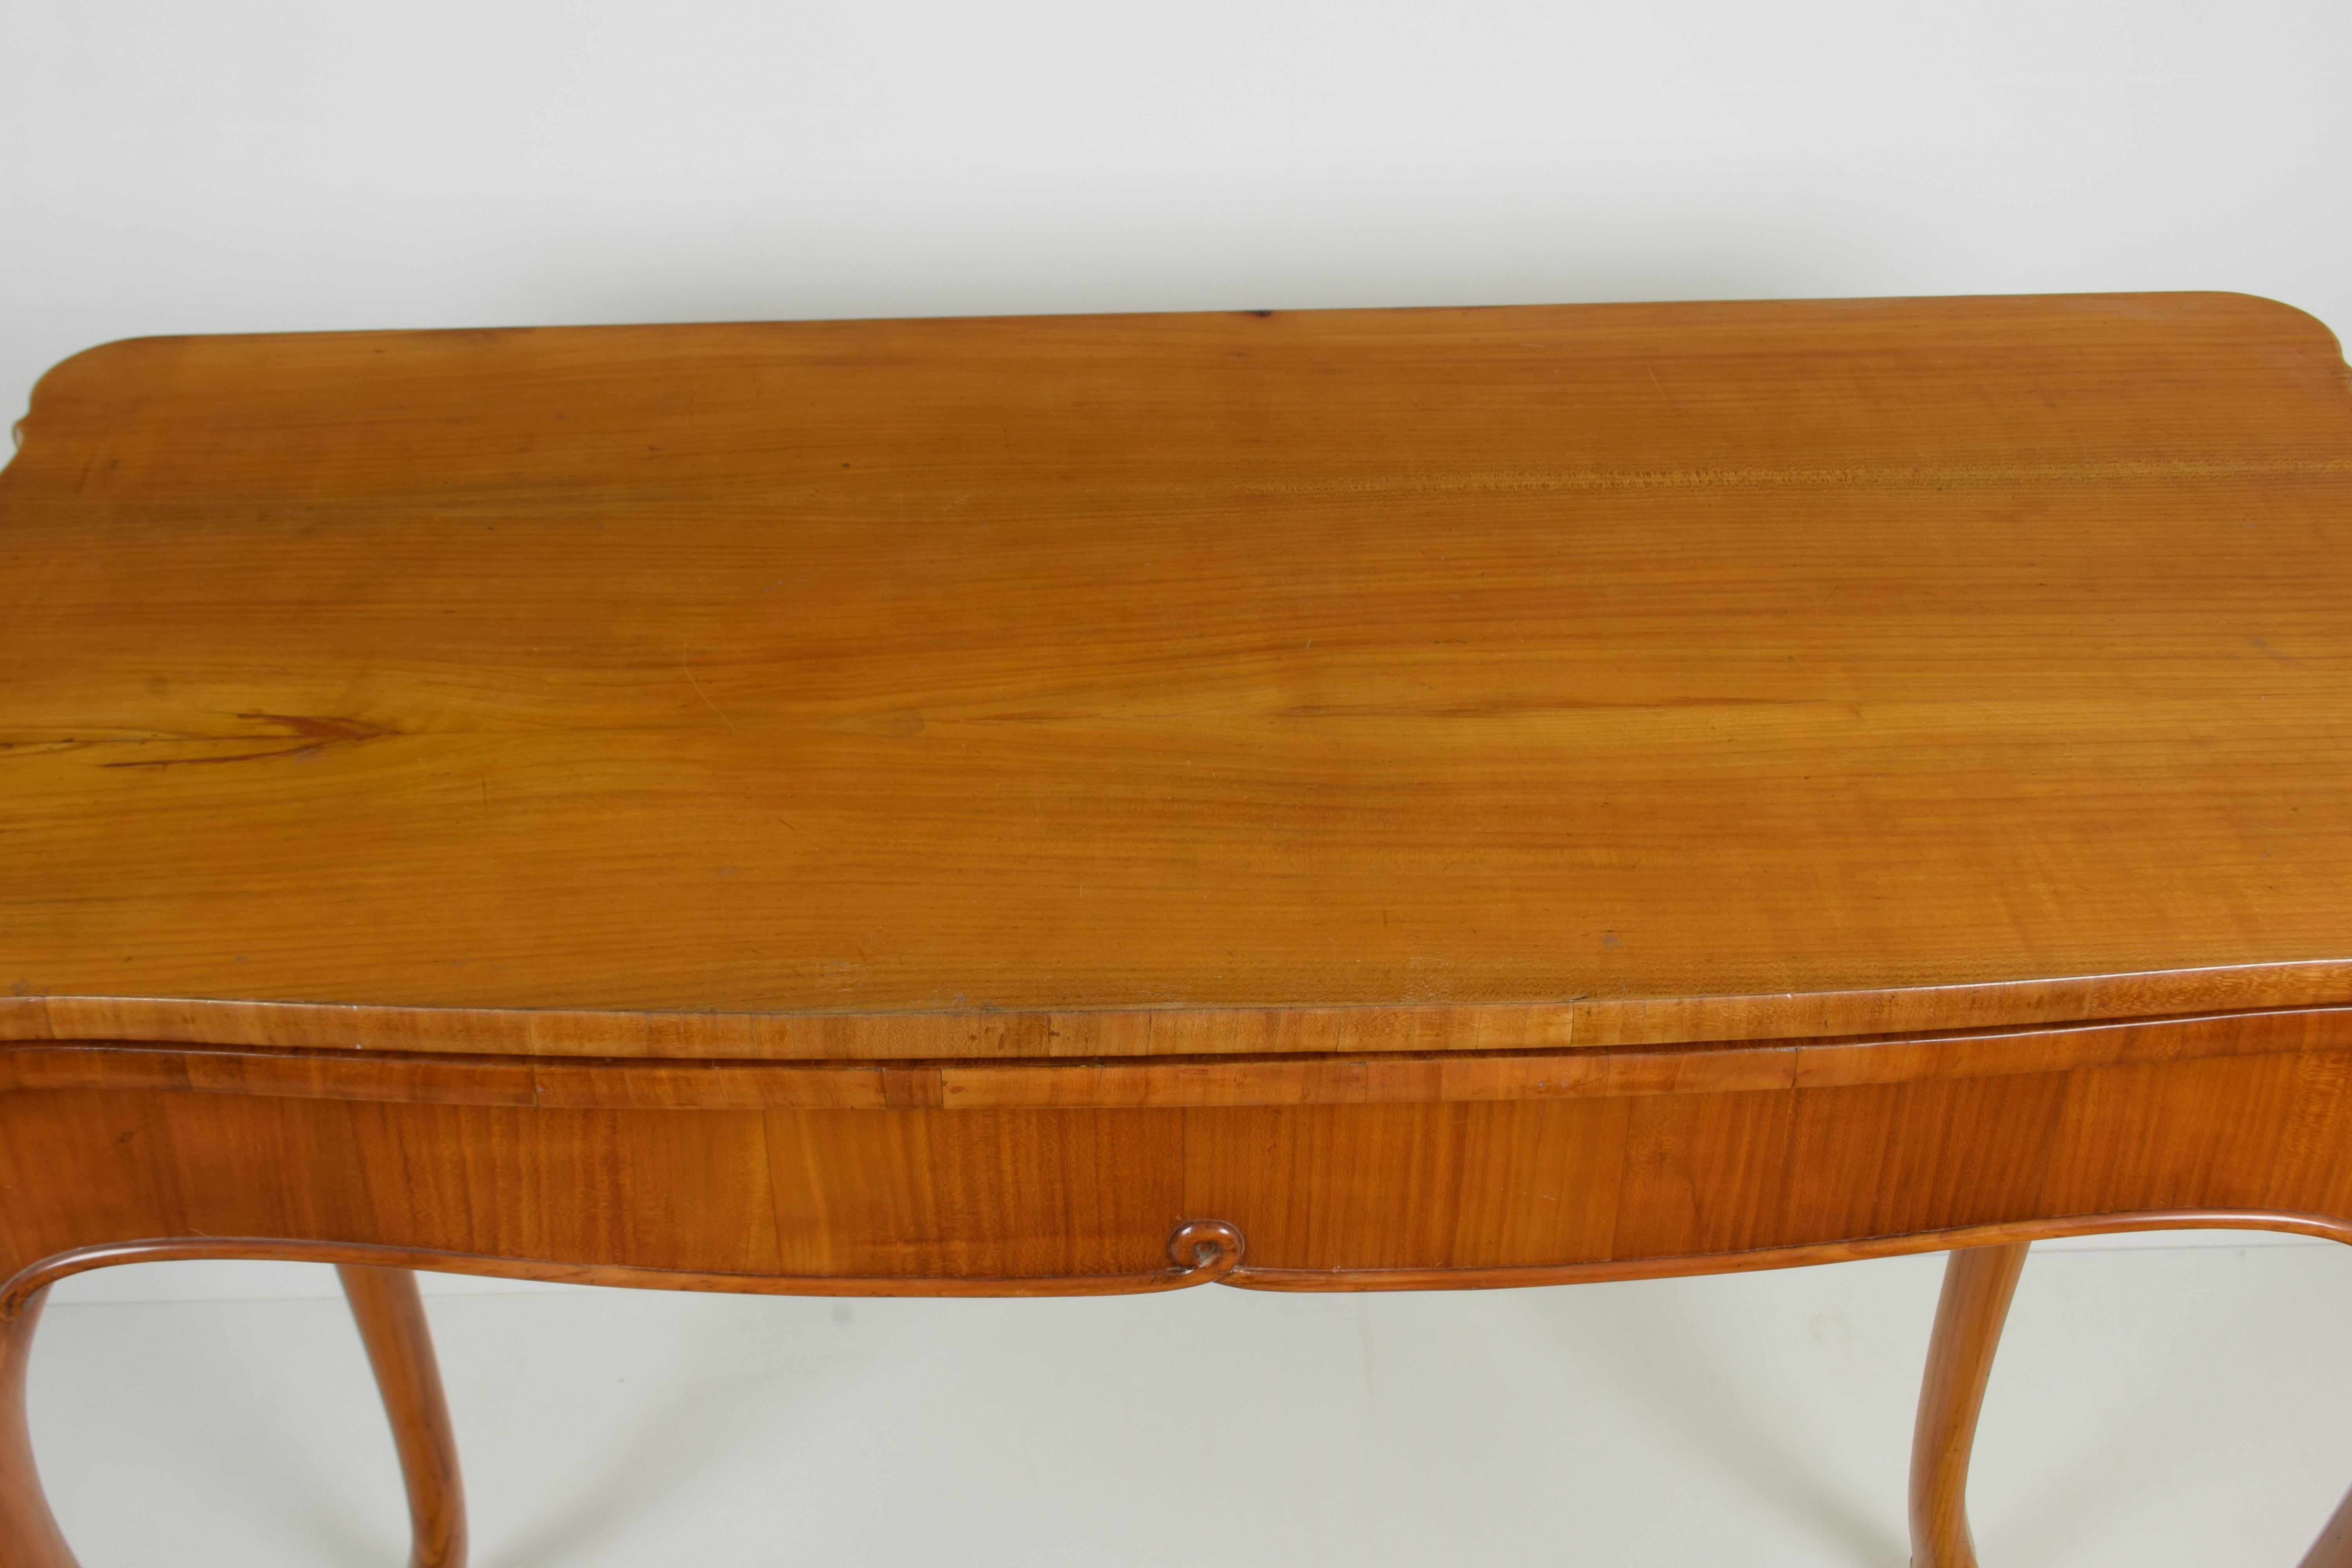 Italian Console Game Table in Cherry Wood, Mid-19th Century For Sale 1